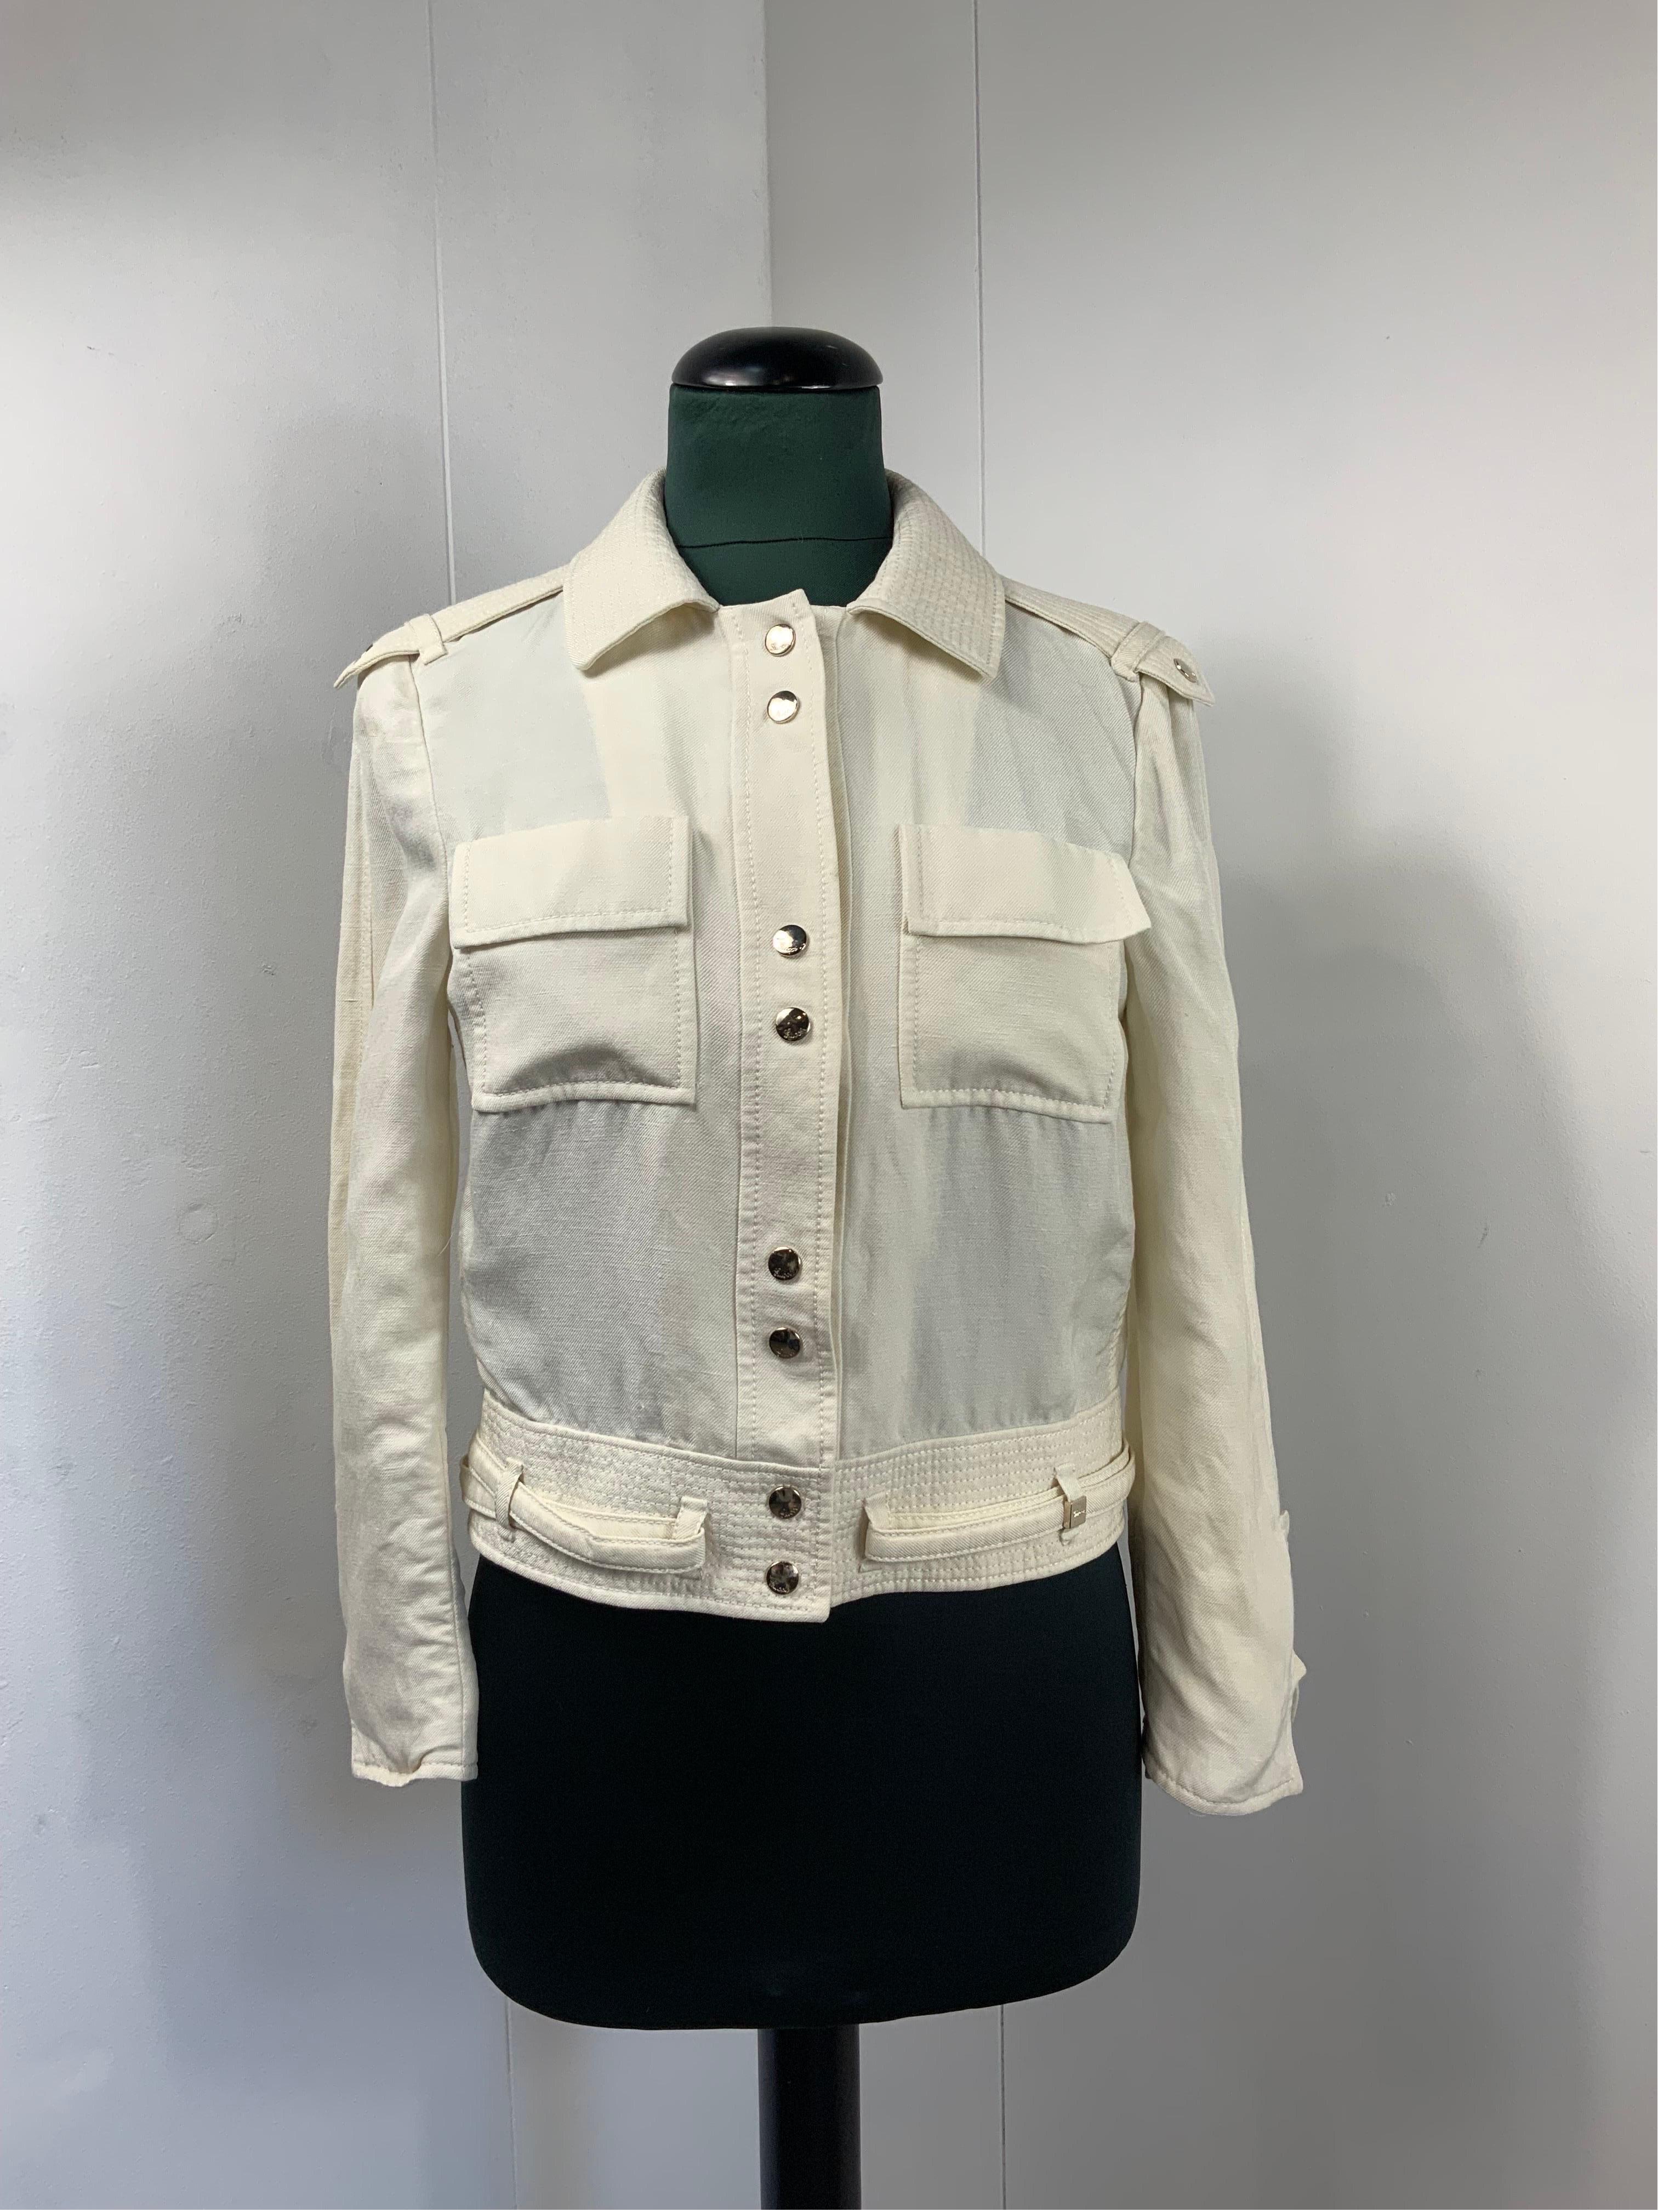 GUCCI LINEN CREAM JACKET.
2006 collection.
In linen and silk. White/cream colour.
All buttons are branded.
Italian size 42.
Shoulders 42cms
Bust 42cm
Length 54cm
Sleeve 54cm
In excellent general condition, it shows minimal signs of normal use.